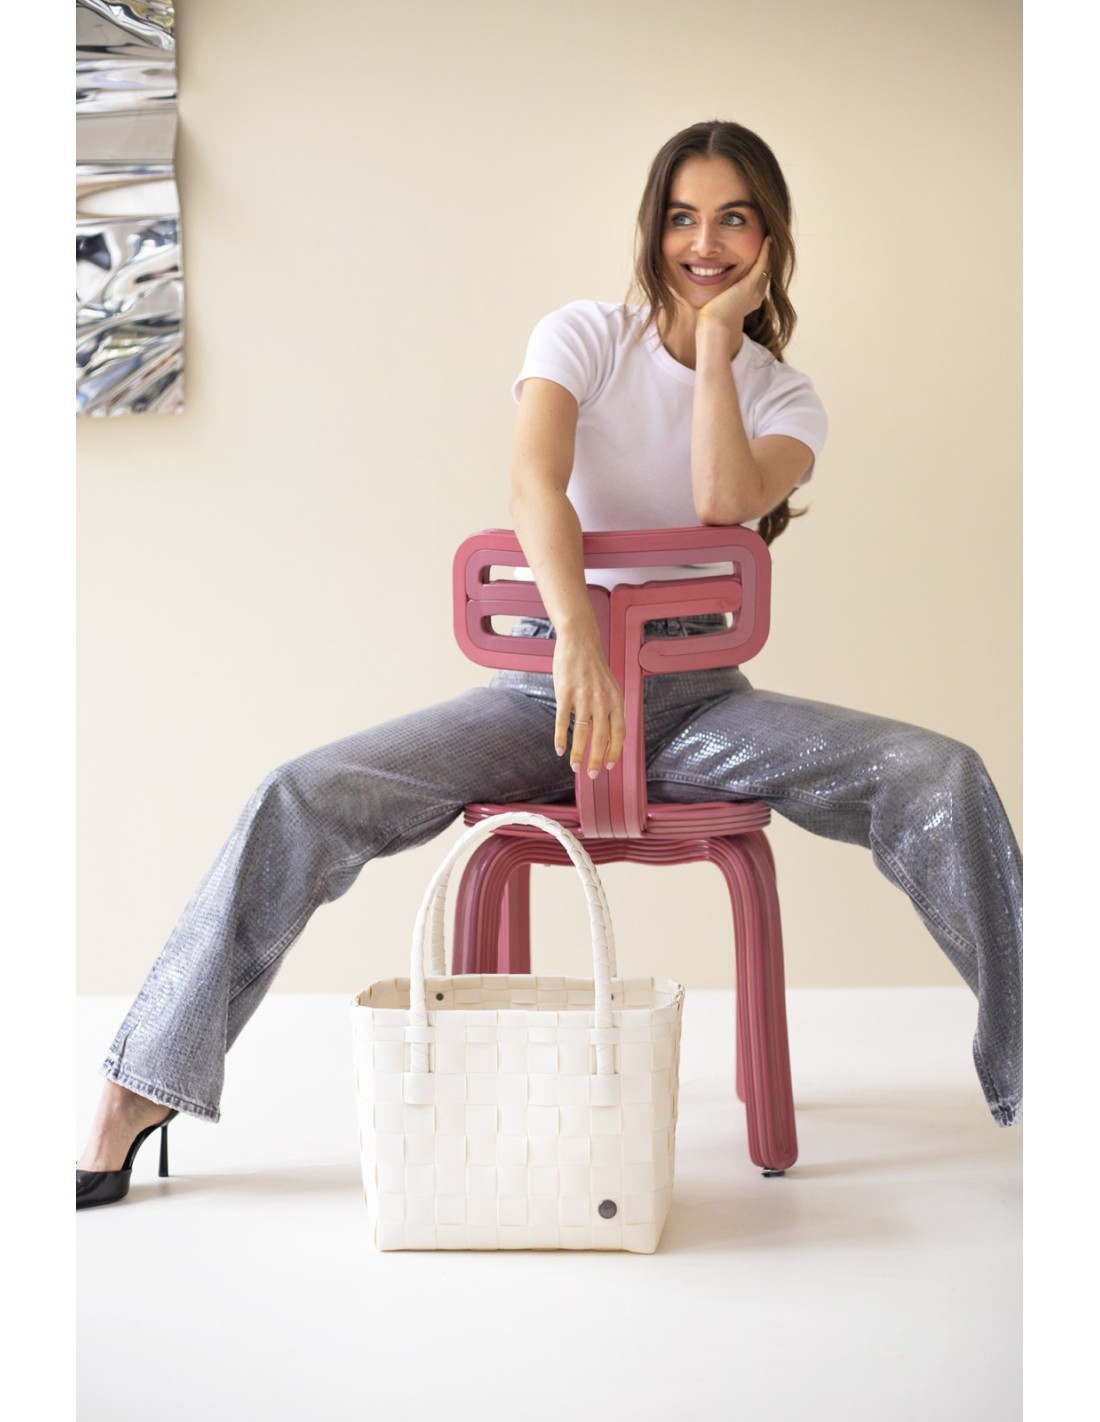 Handed By Paris - Shopper, Farbe: Pearl white